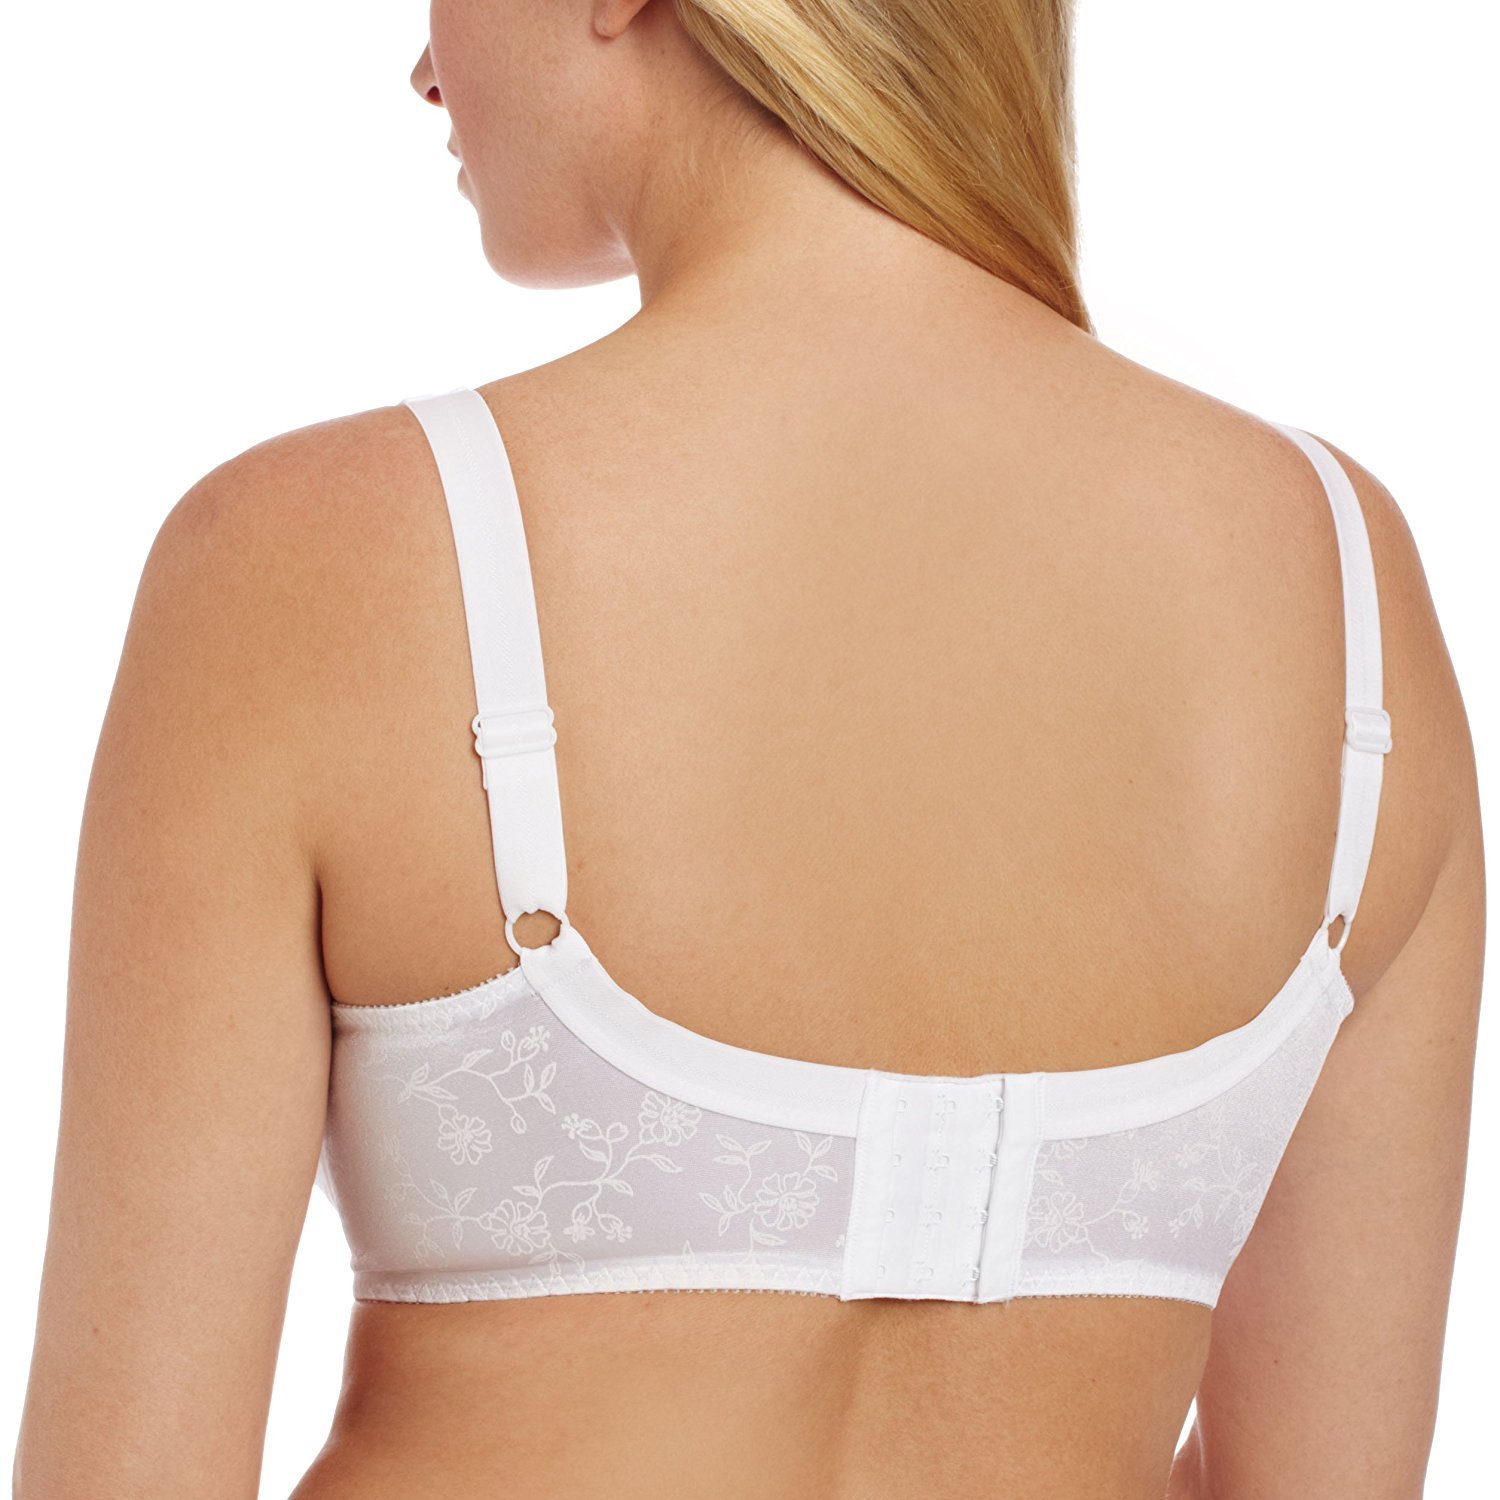 Playtex Women's Secrets Love My Curves Signature Floral Underwire Full Coverage Bra Us4422